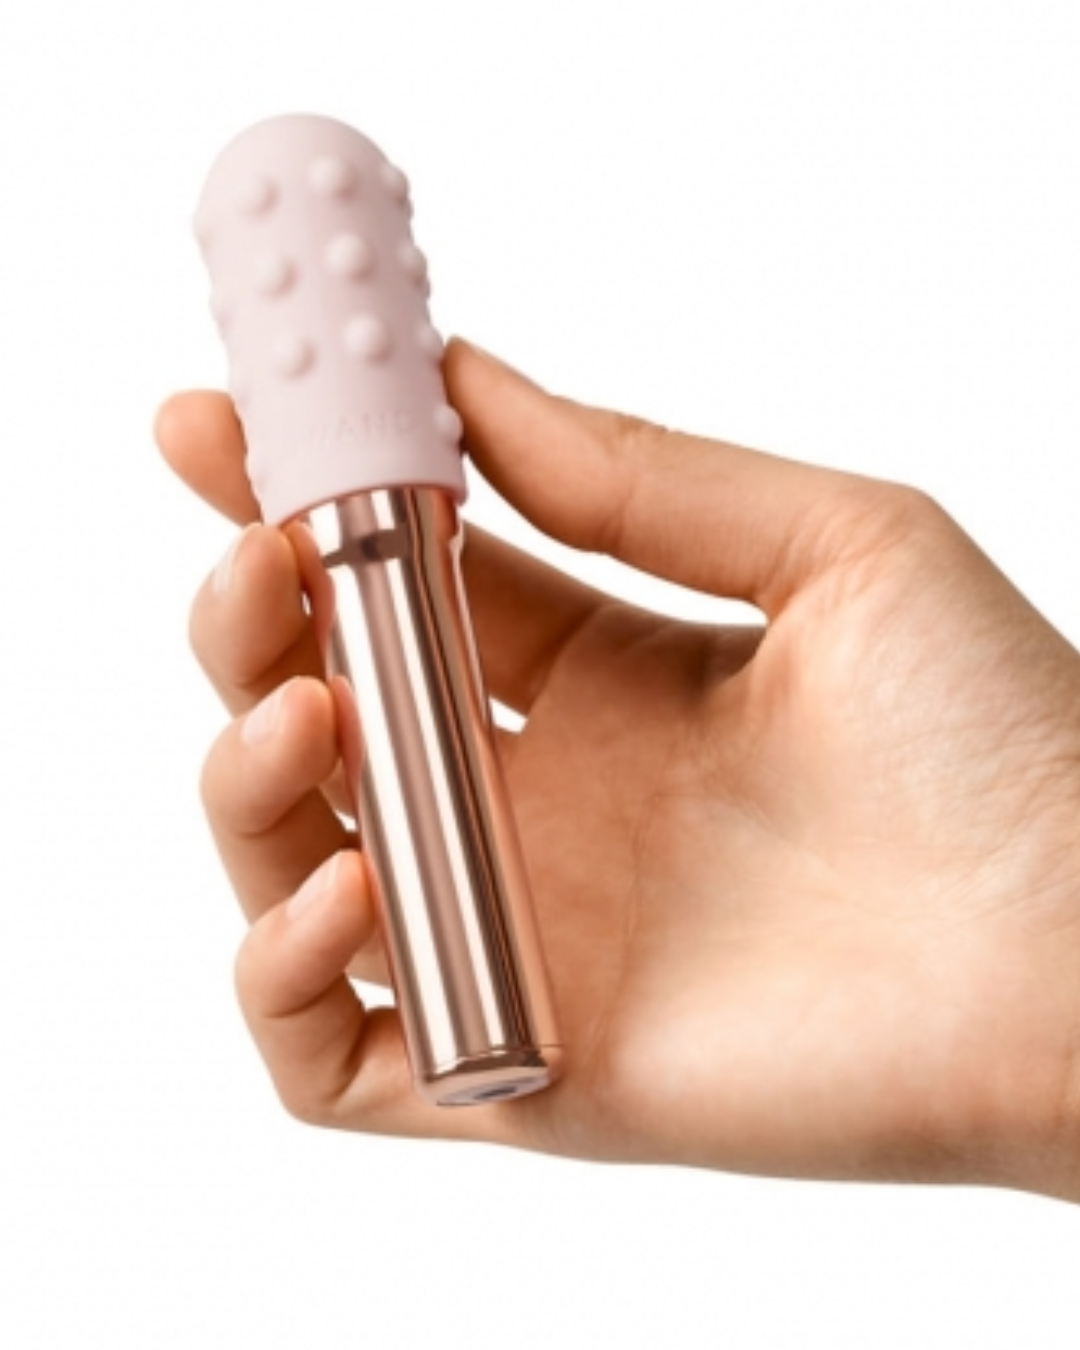 Le Wand Chrome Grand Bullet Waterproof Rechargeable Metal Bullet with Texture Sleeve - Rose Gold held in a hand